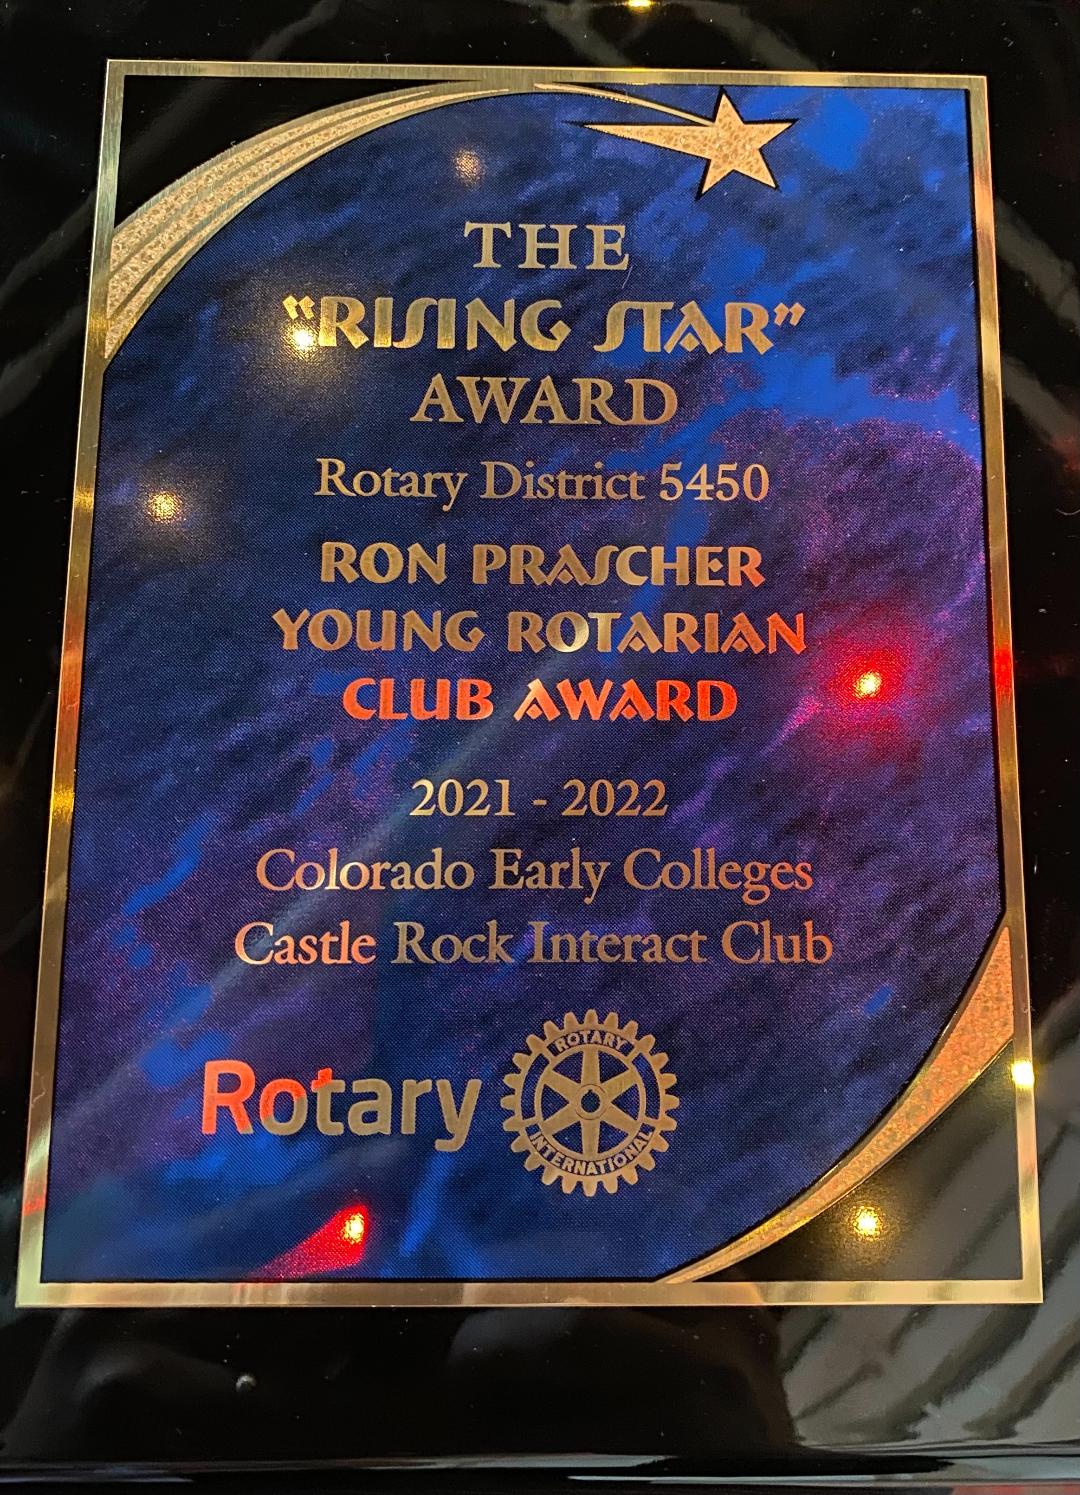 Student Spotlight: Congratulations to CEC Castle Rock Interact Club on Winning the “Ron Prascher Rising Star” Award for Their Exceptional Service Work!